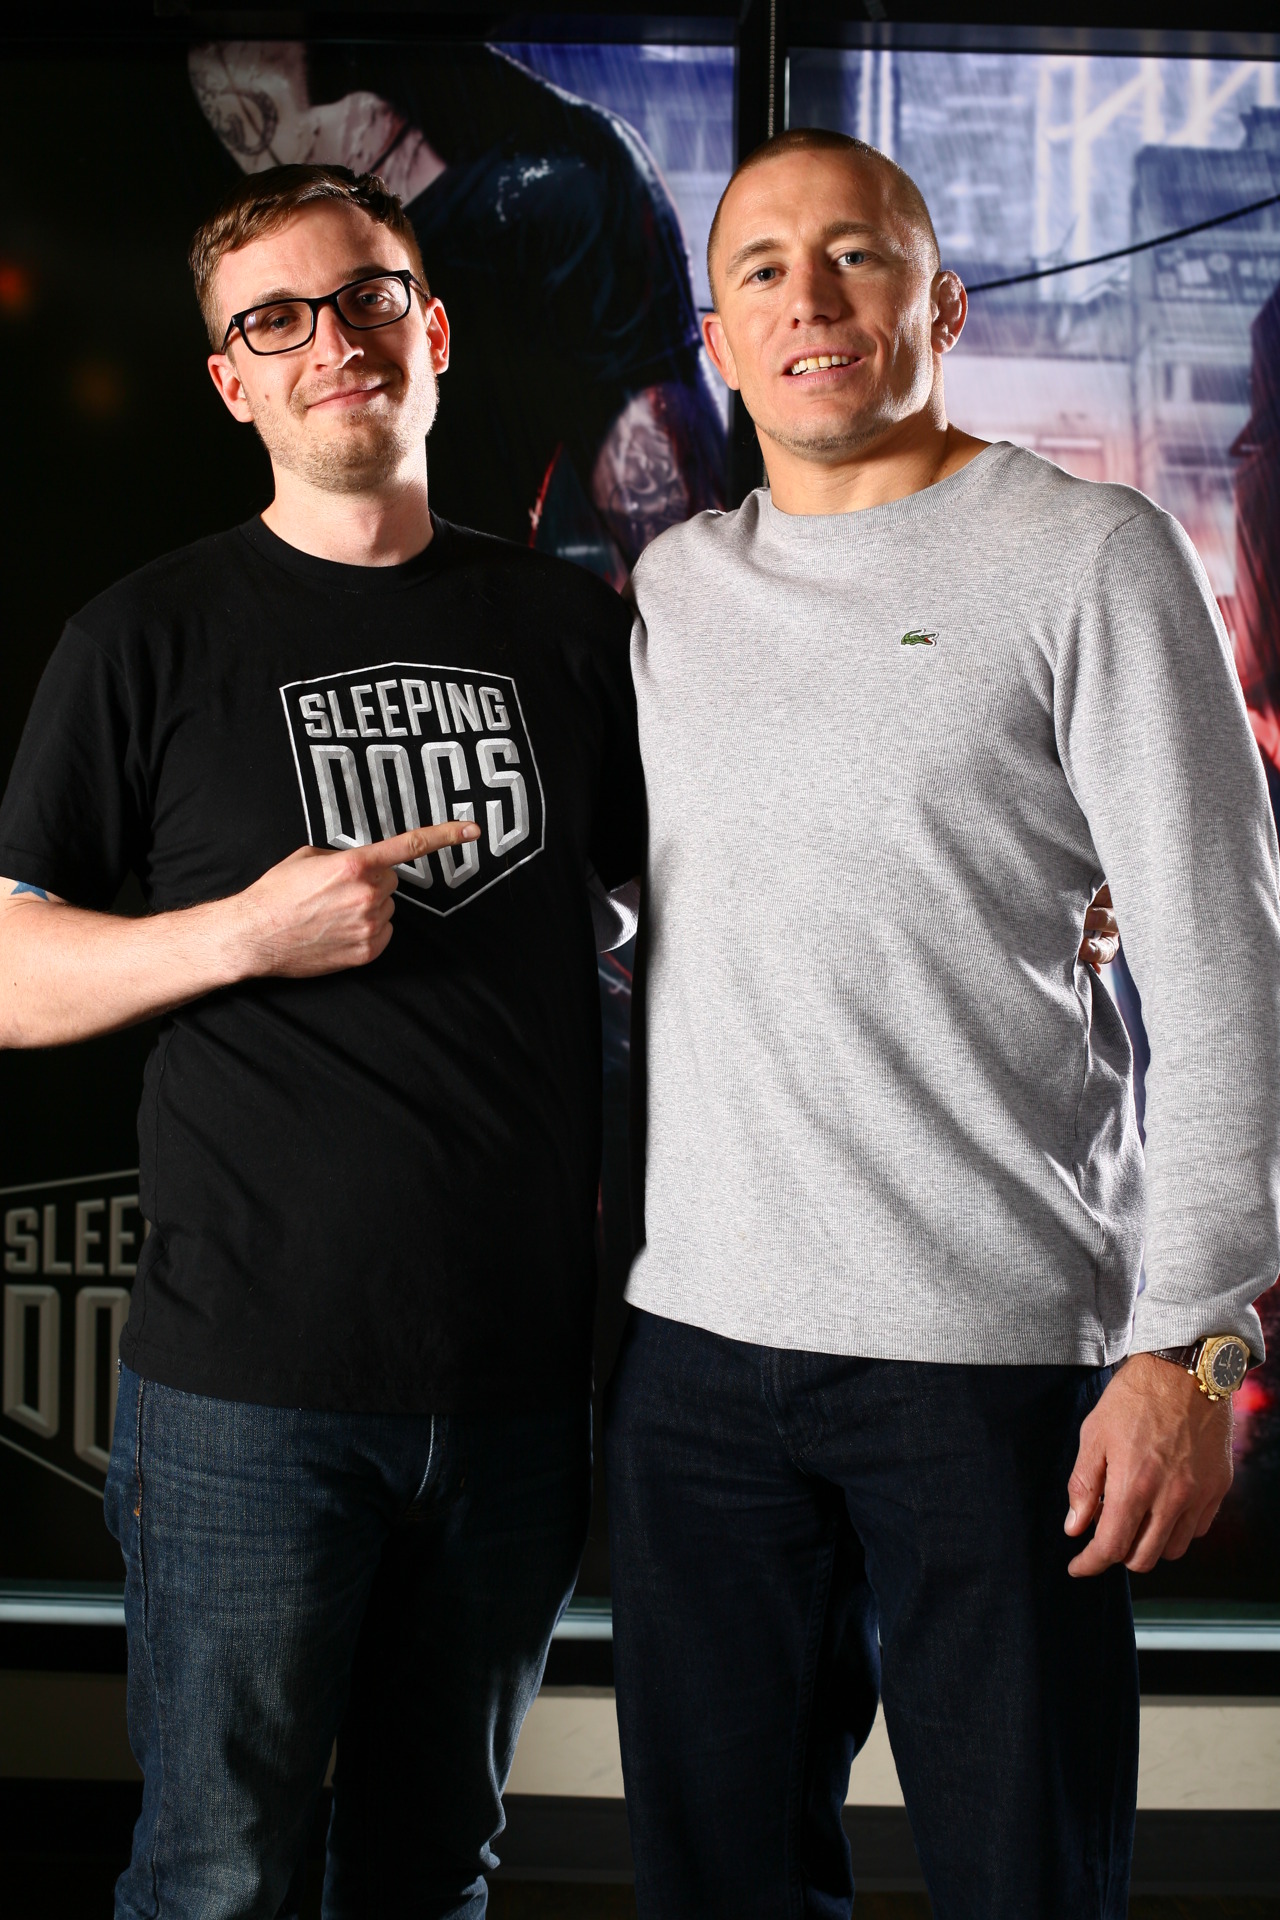 Me with GSP (nicest professional athlete ever)